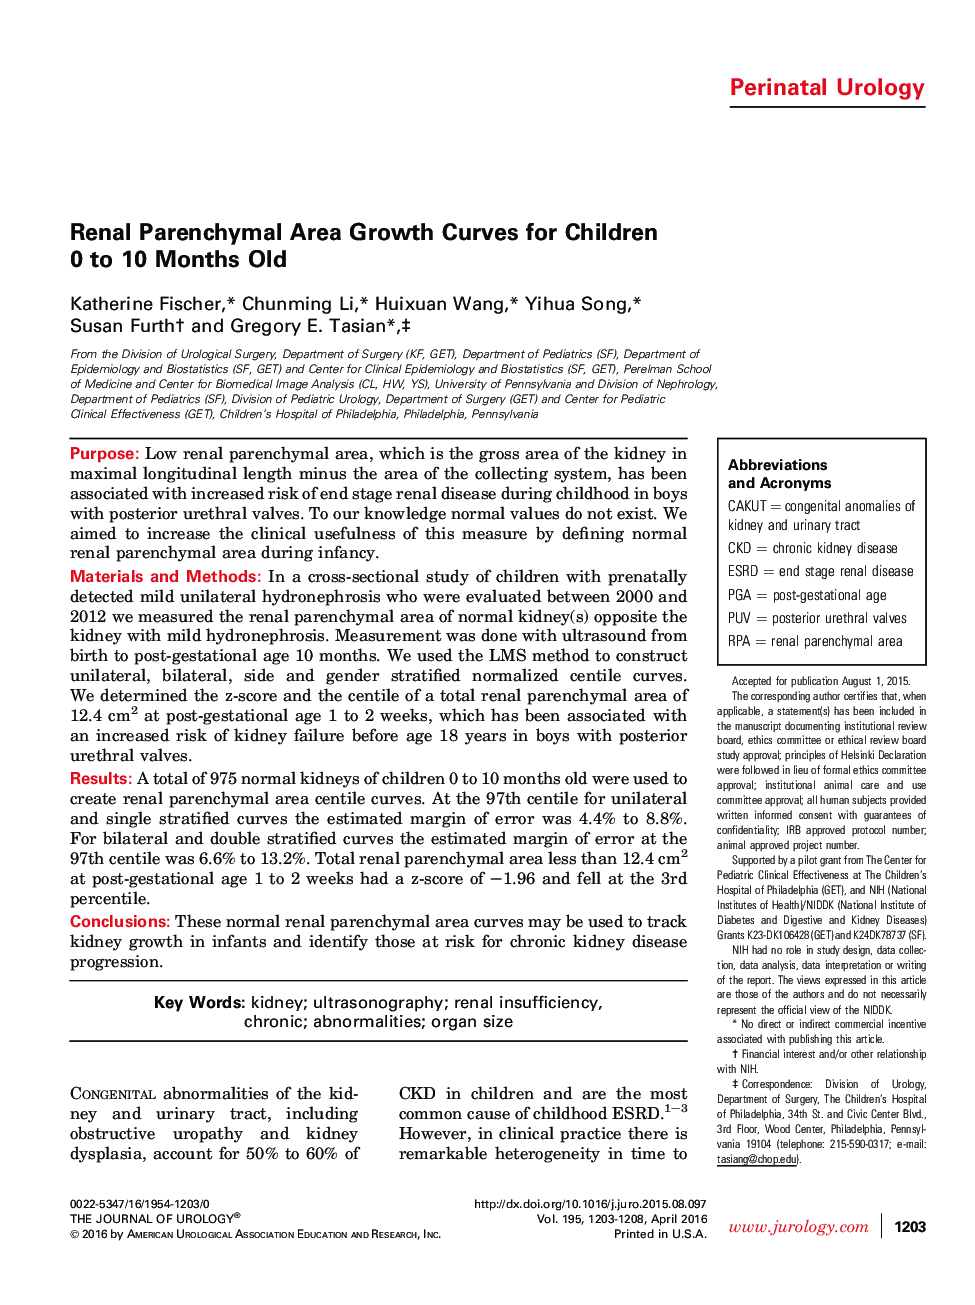 Renal Parenchymal Area Growth Curves for Children 0 to 10 Months Old 